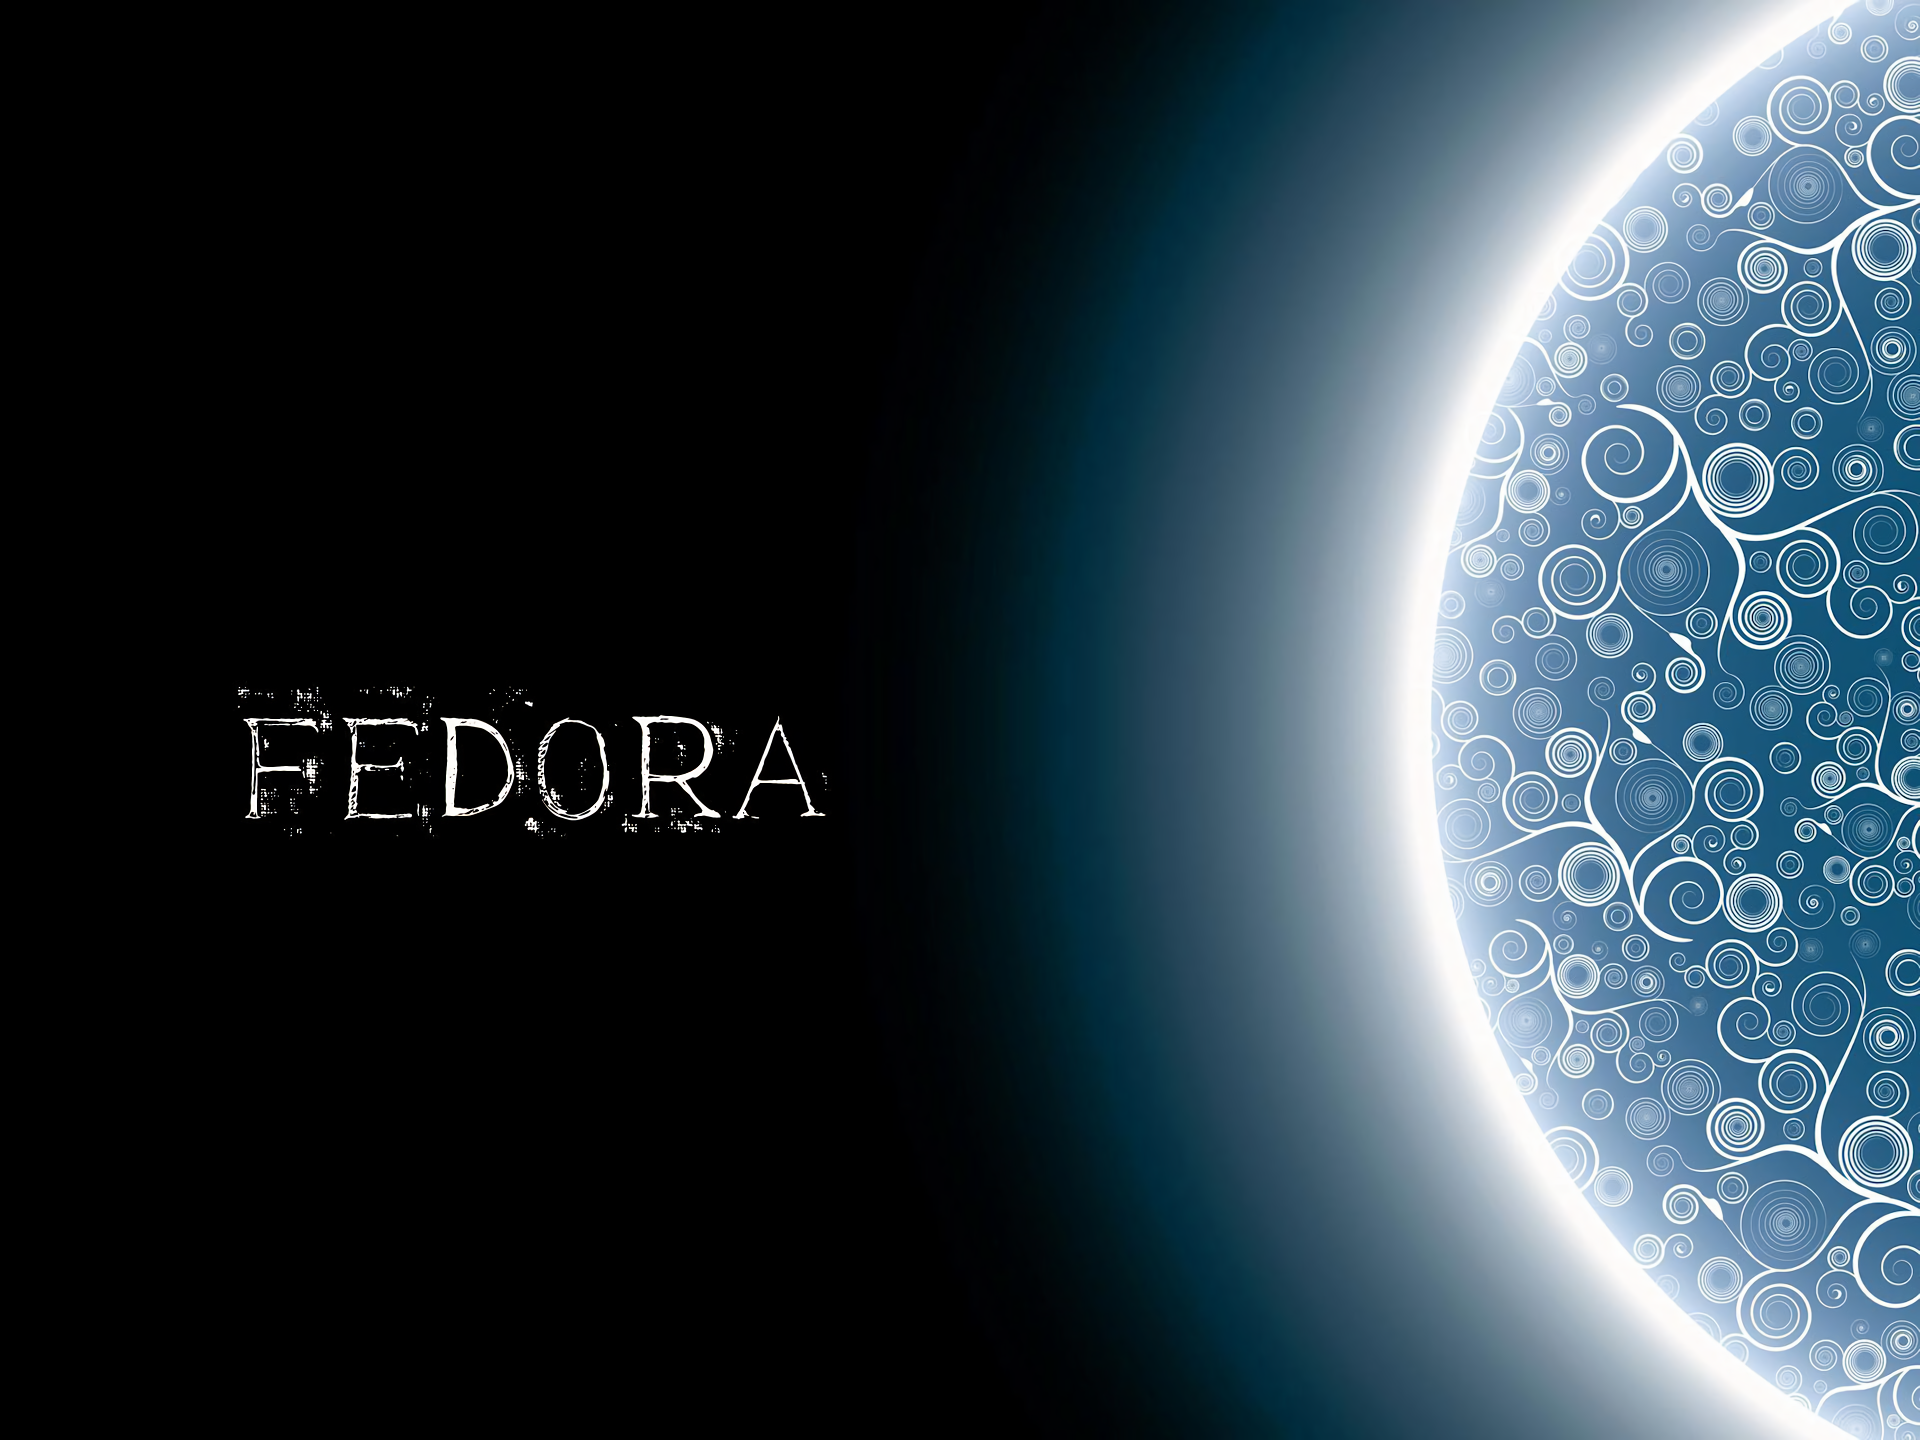 fedora wallpaper,atmosphere,astronomical object,sky,outer space,planet